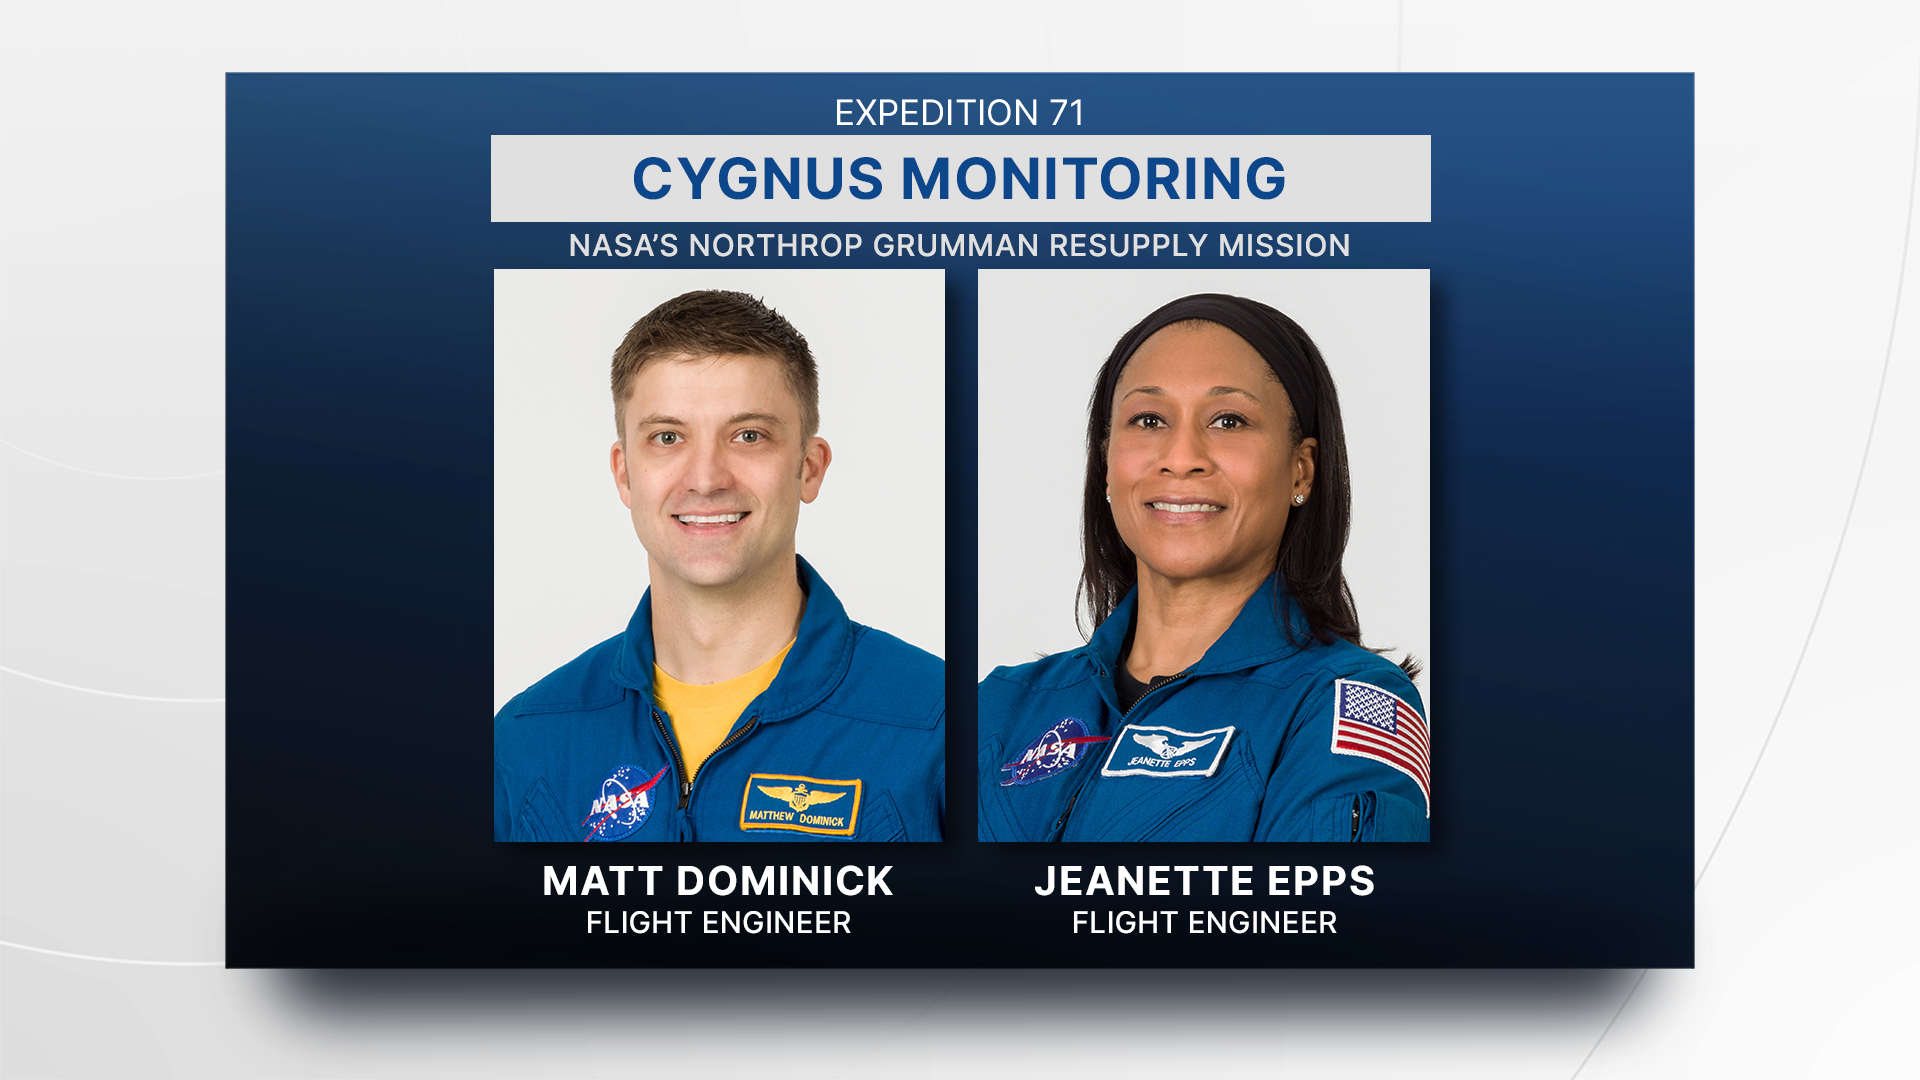 NASA astronauts Matthew Dominick and Jeanette Epps will be on duty during the Cygnus spacecraft’s approach and rendezvous. Dominick will be at the controls of the Canadarm2 robotic arm ready to capture Cygnus as Epps monitors the vehicle’s arrival.